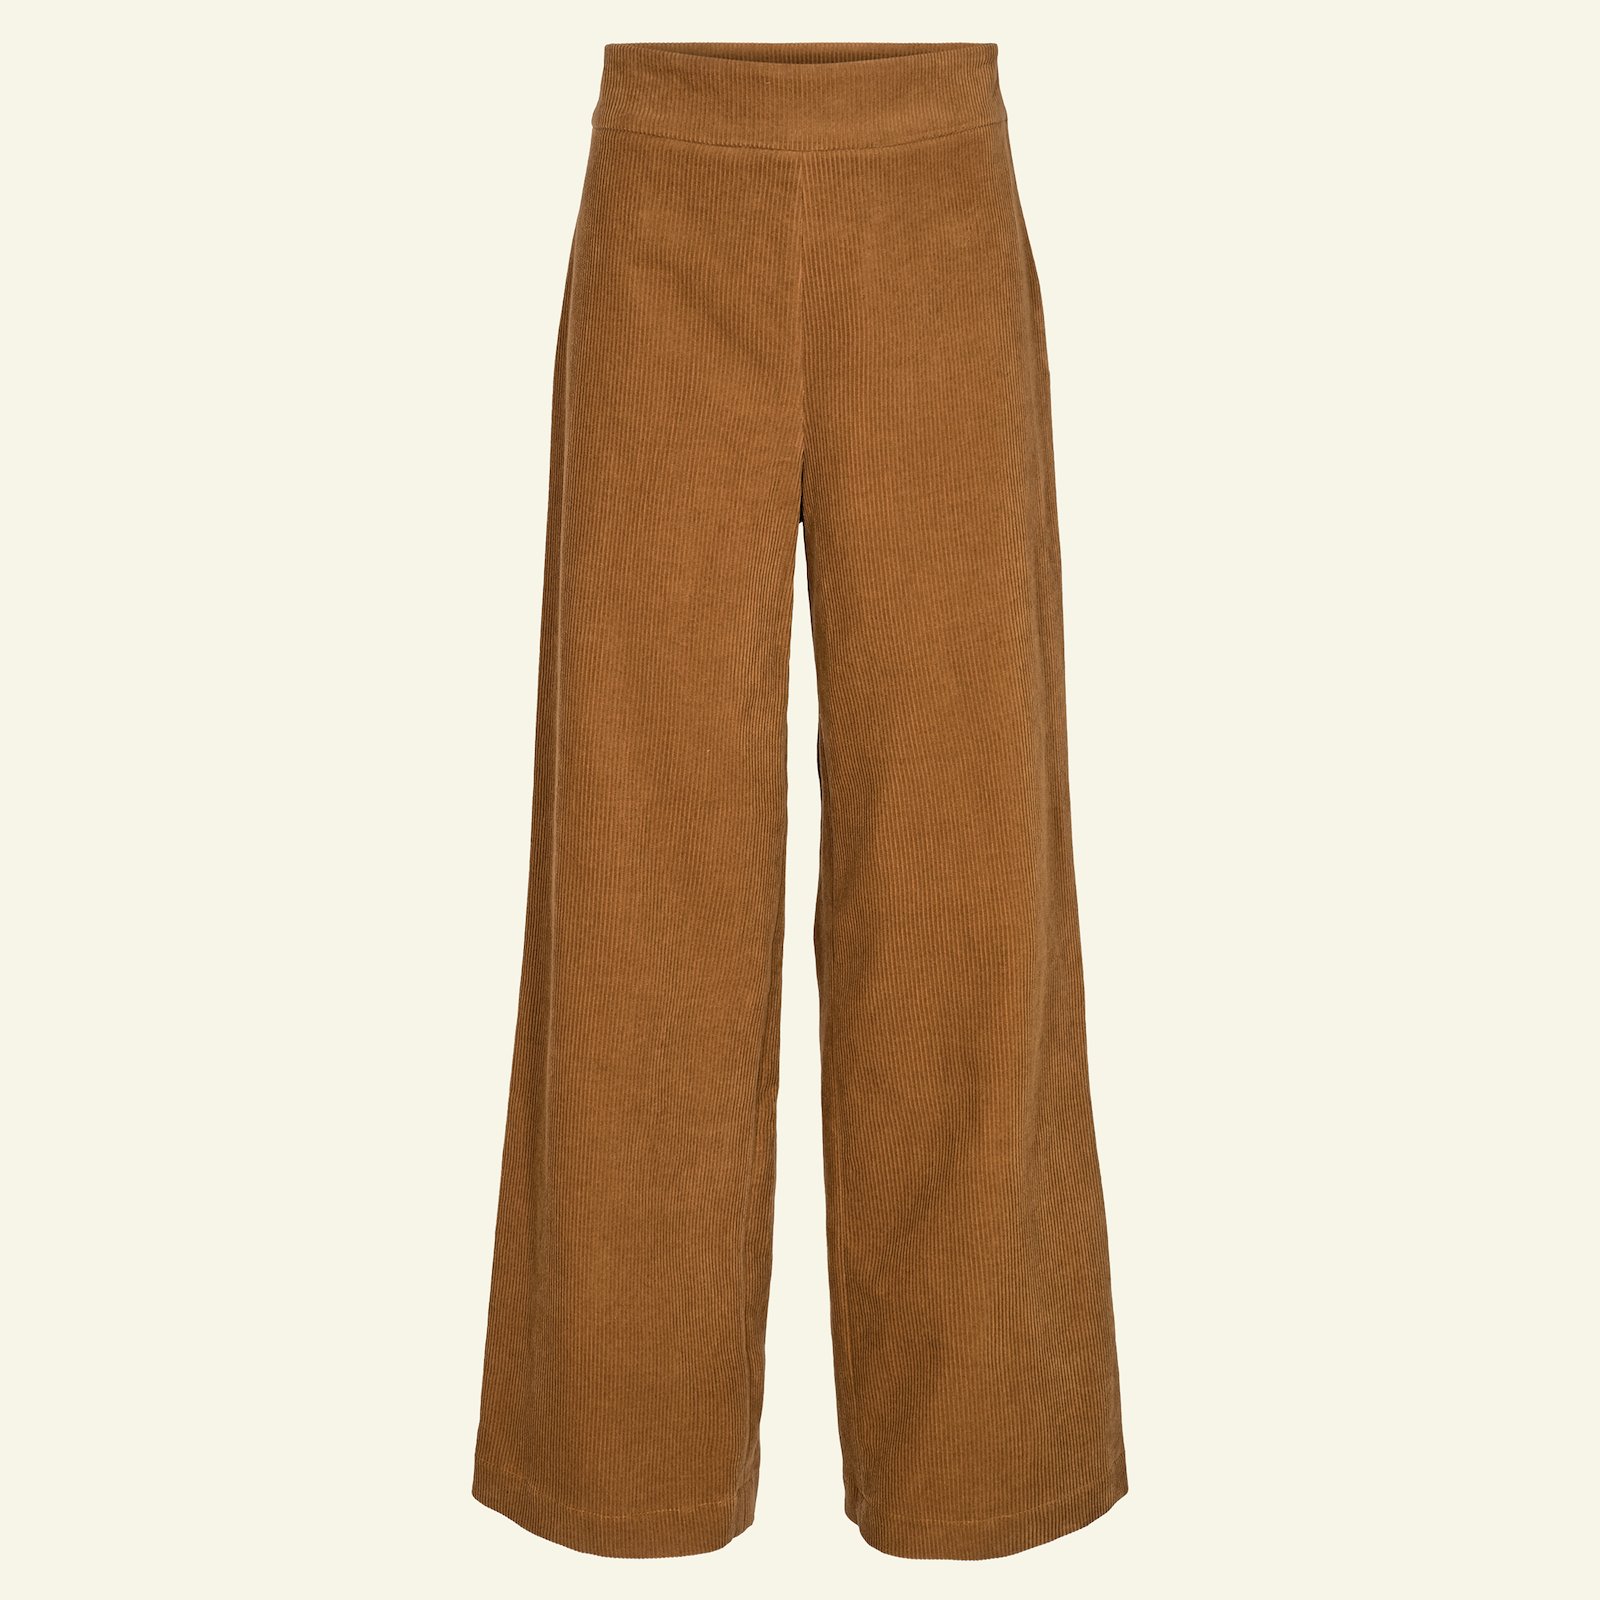 Highwaist and wide legs trousers, 36/8 p20052_430810_sskit